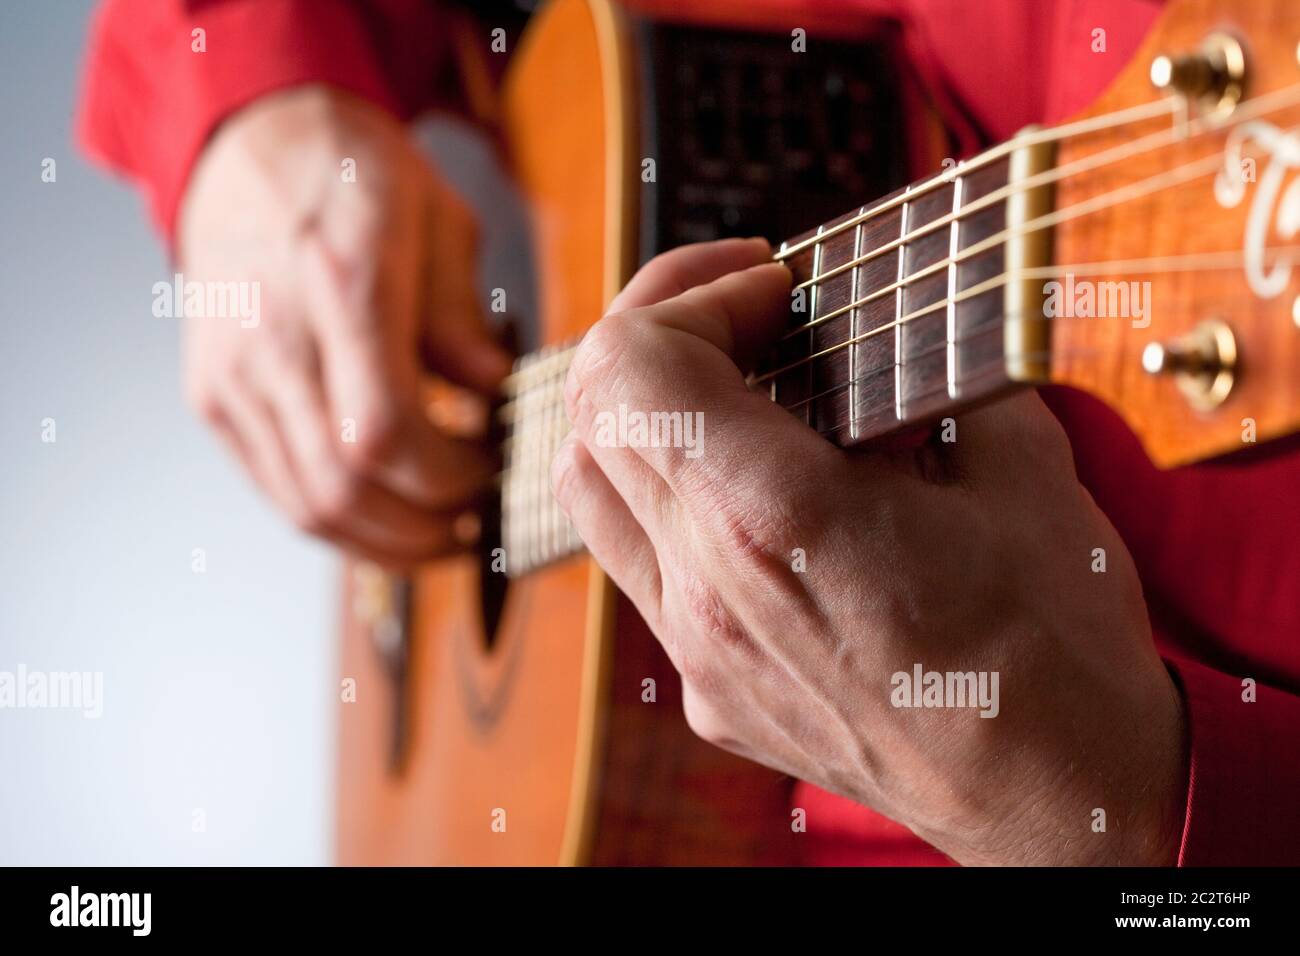 Fingers of a guitar player playing acoustic guitar. Stock Photo